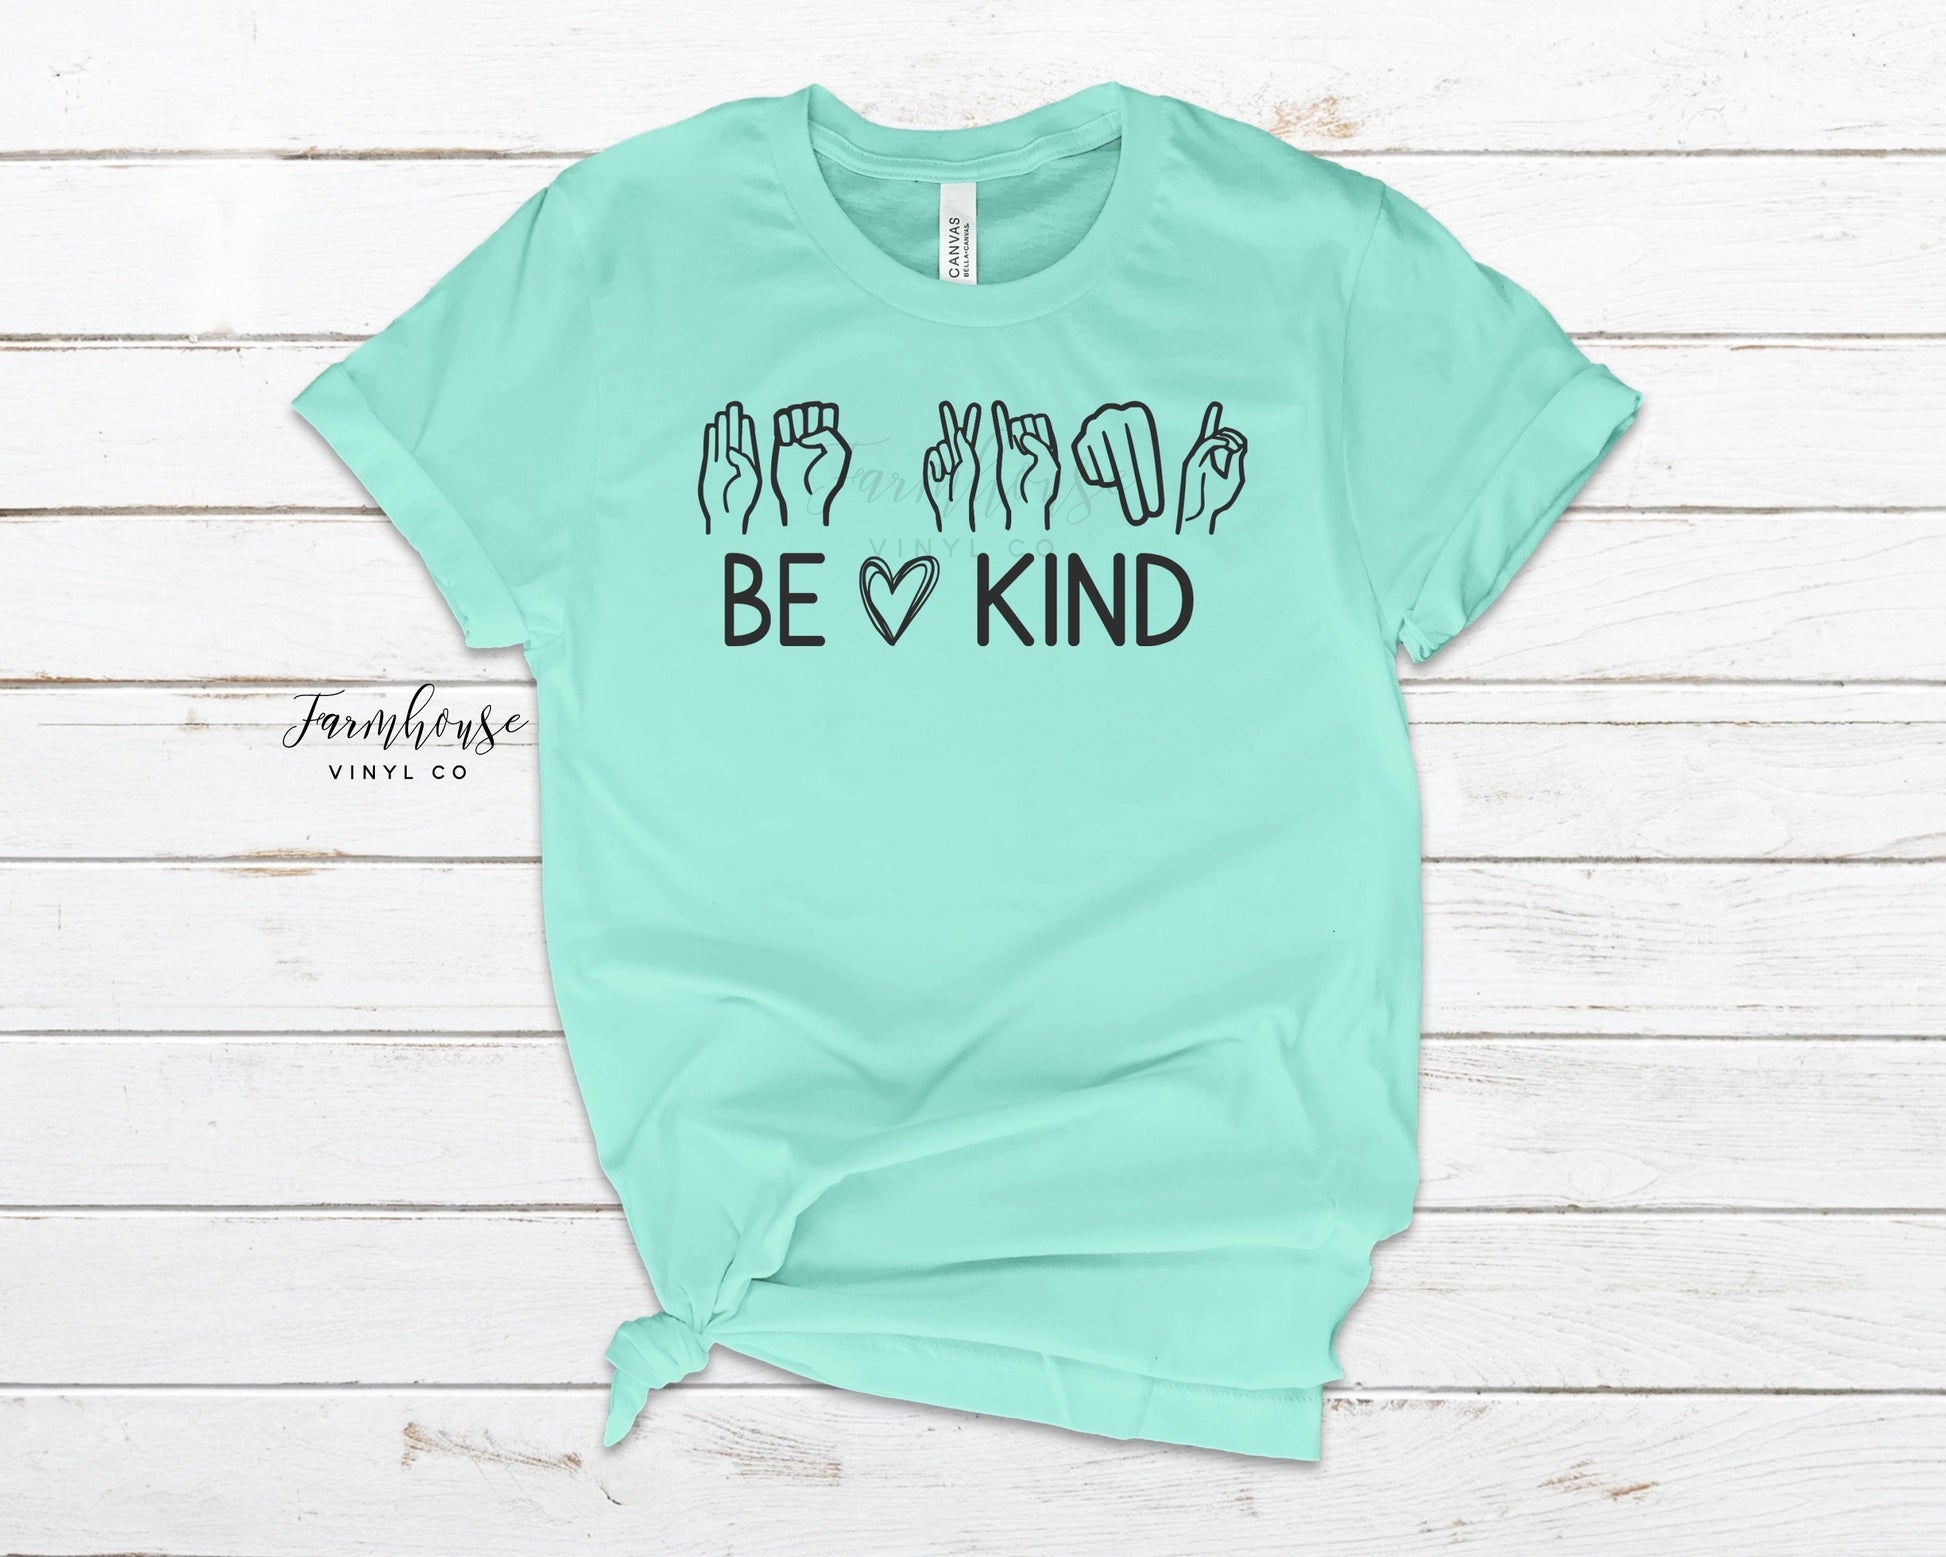 Be Kind Kind T Shirt Mom Shirt Collection Mom Tee Shirts Womans Tee Shirts Teacher Gift Mothers Day Gift Raise Them Kind Humanity Shirt BLM - Farmhouse Vinyl Co